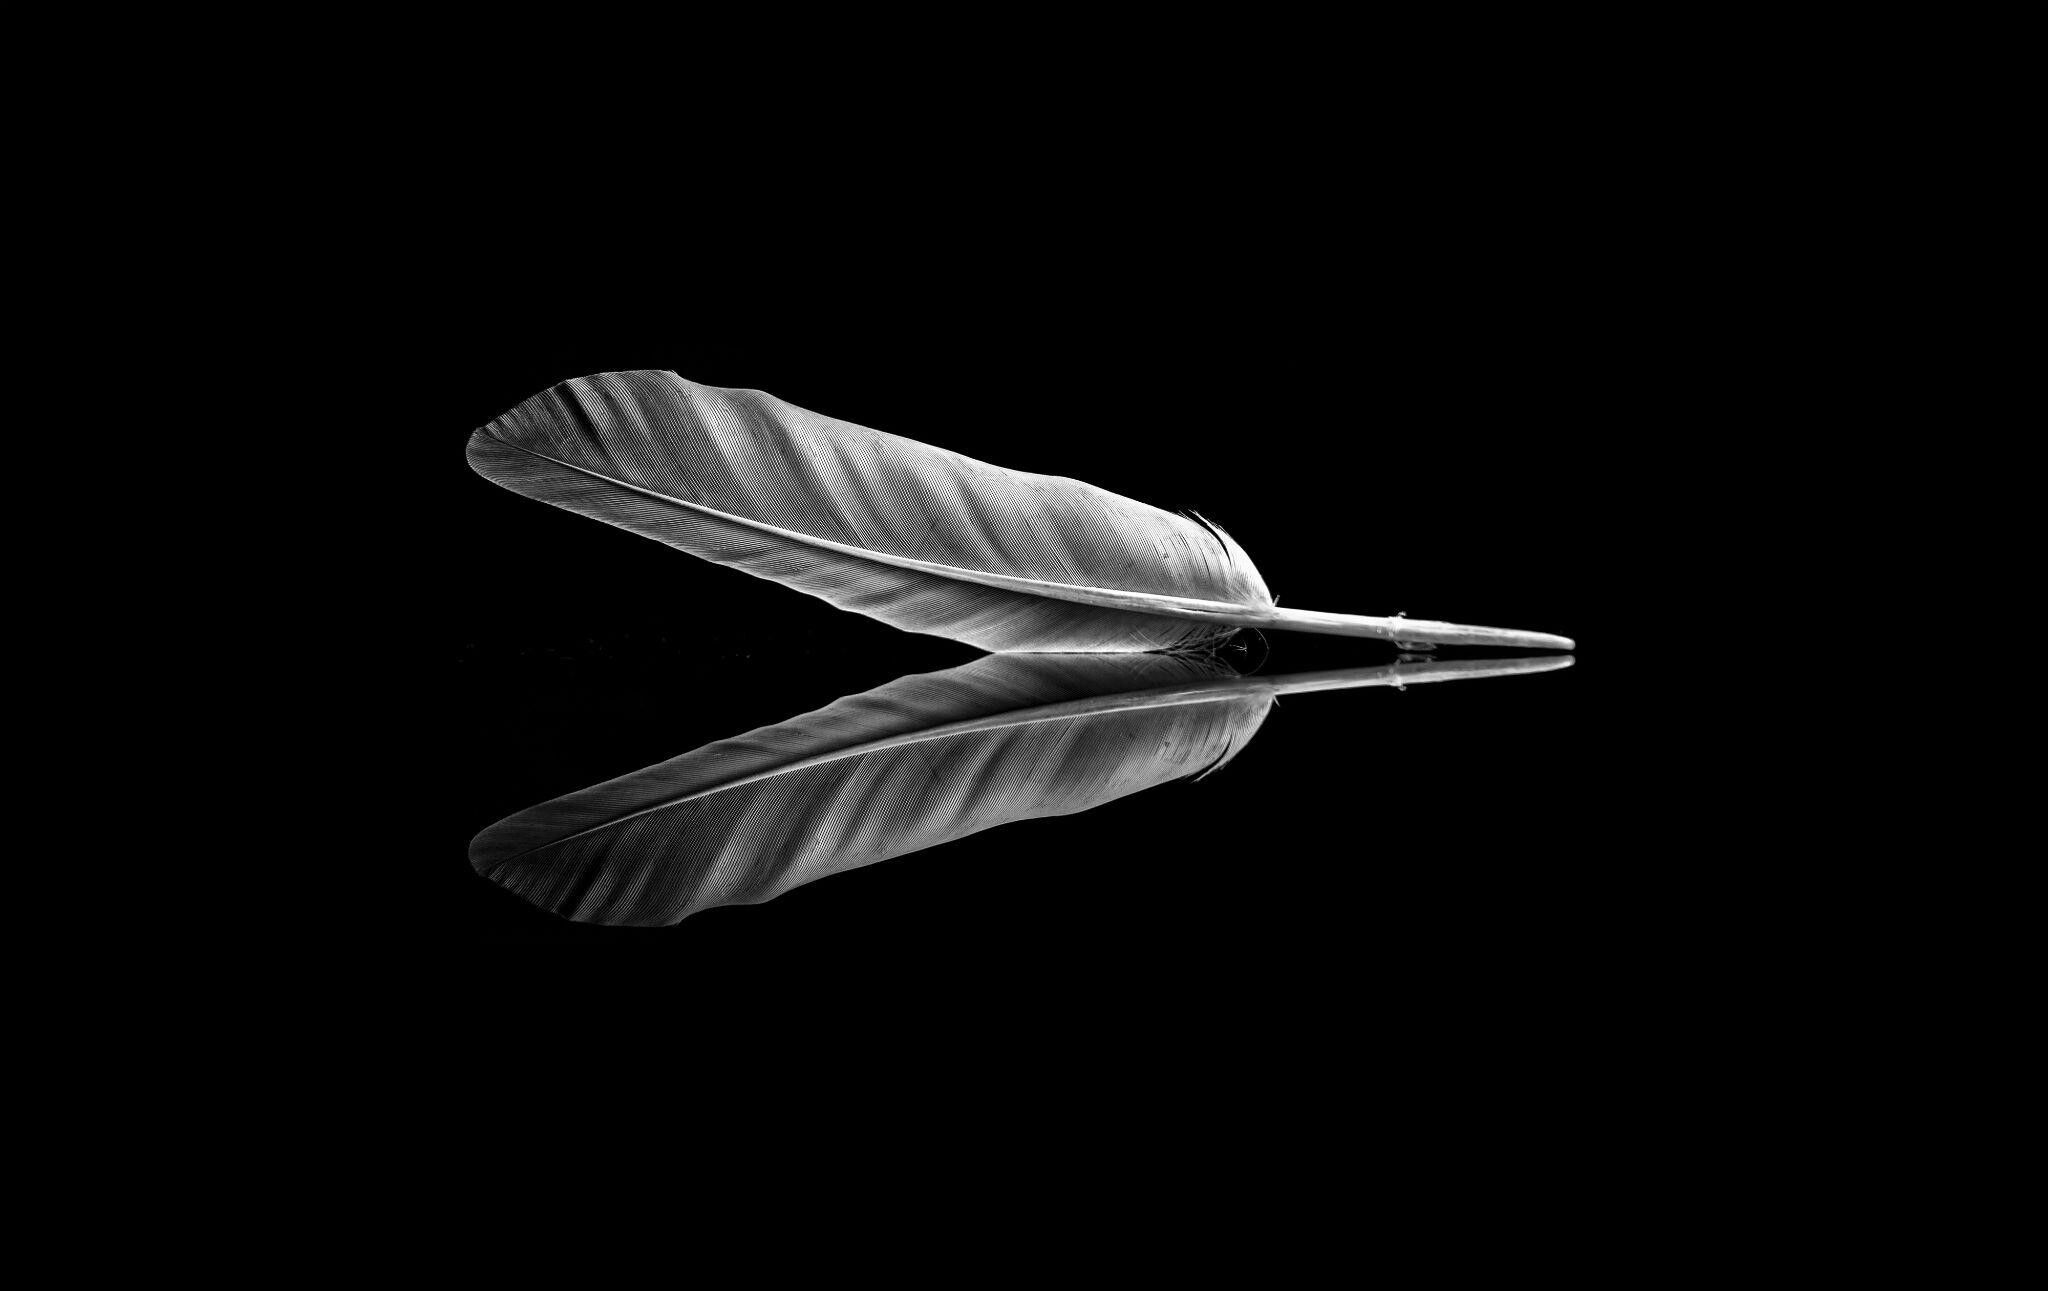 Feather reflected on black surface with black background